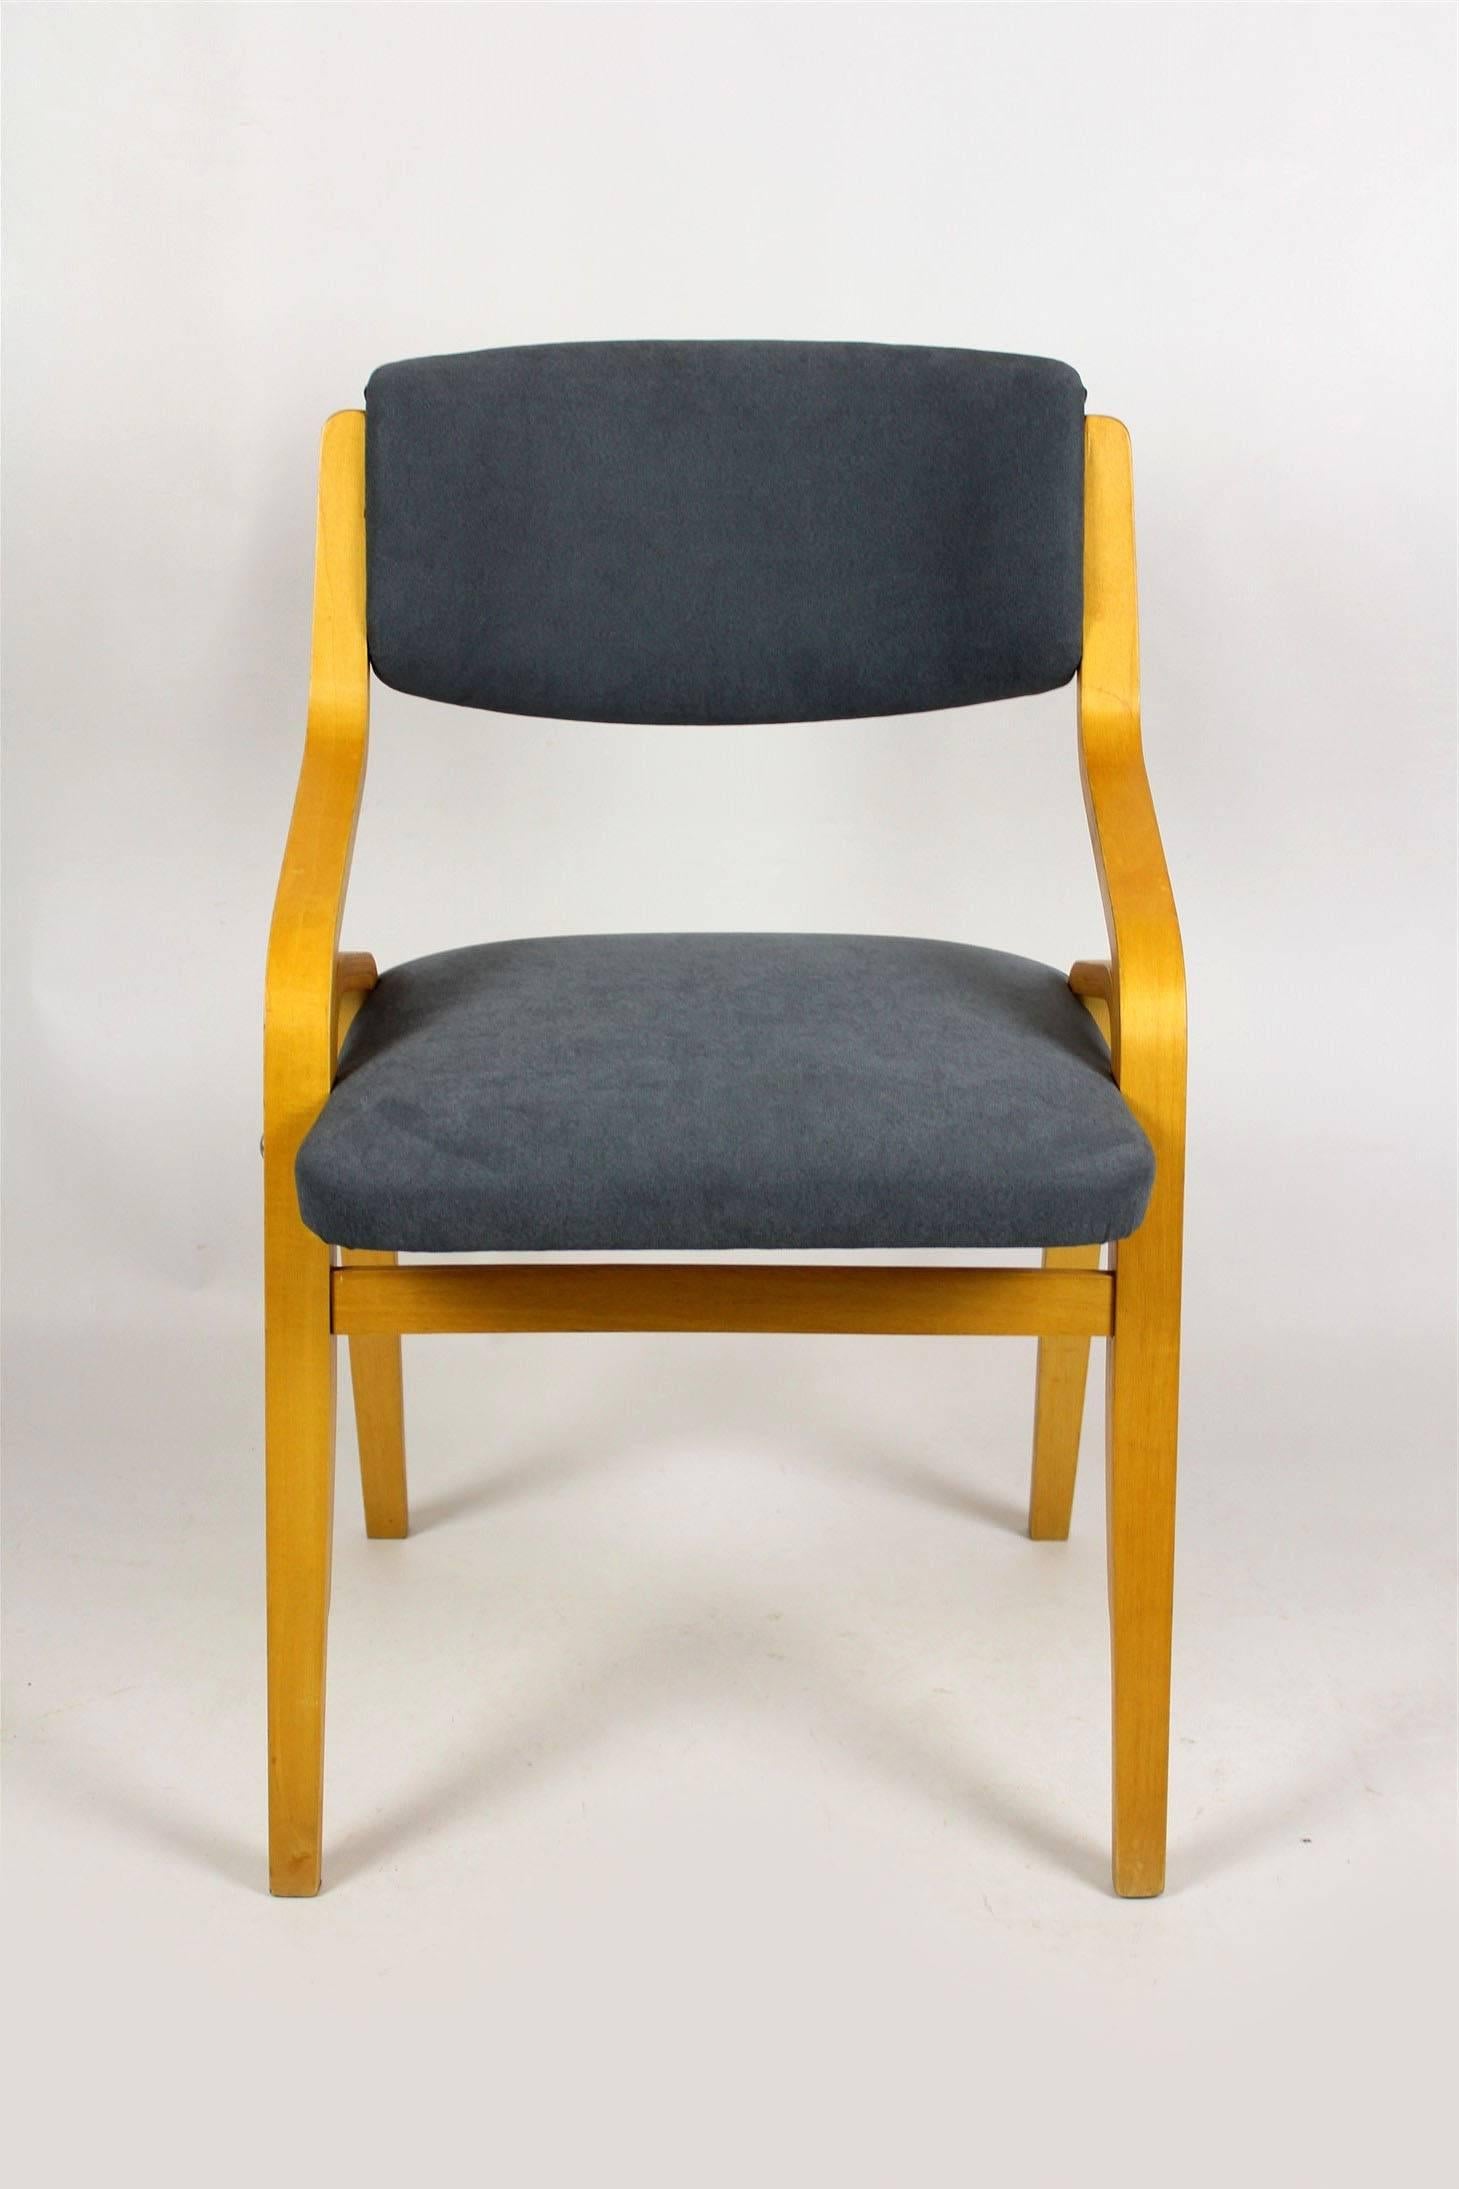 Fabric Czech Bent Plywood Chairs from Holesov, 1970s, Set of Four For Sale